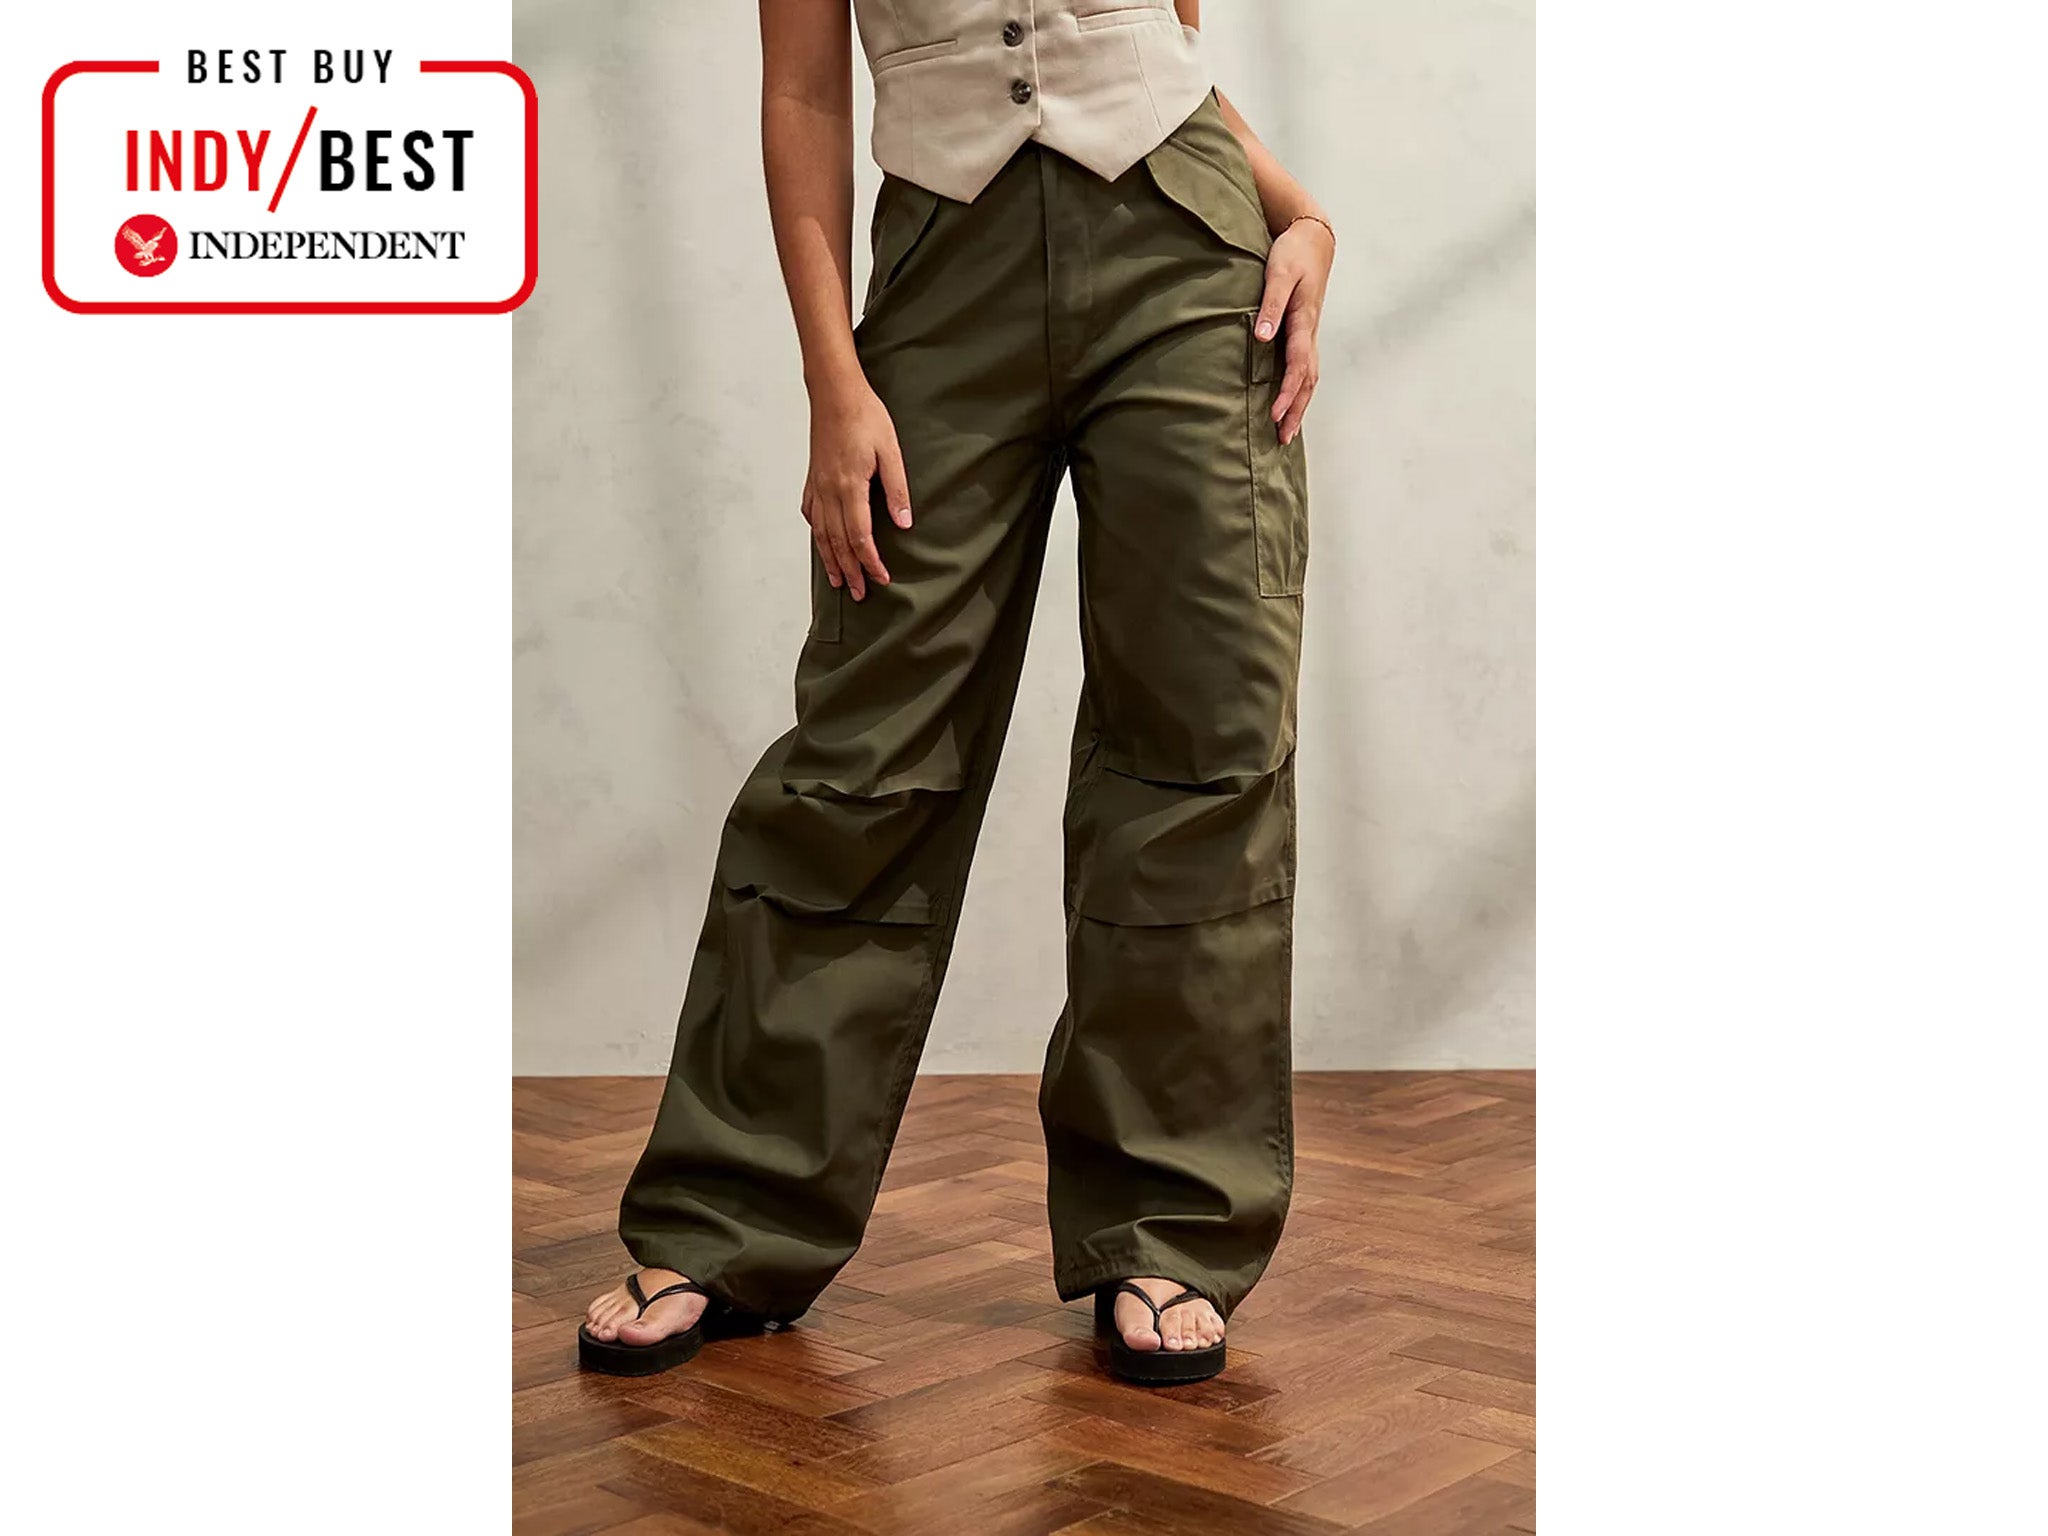 The 10 Best Red Cargo Pants to Shop Right Now